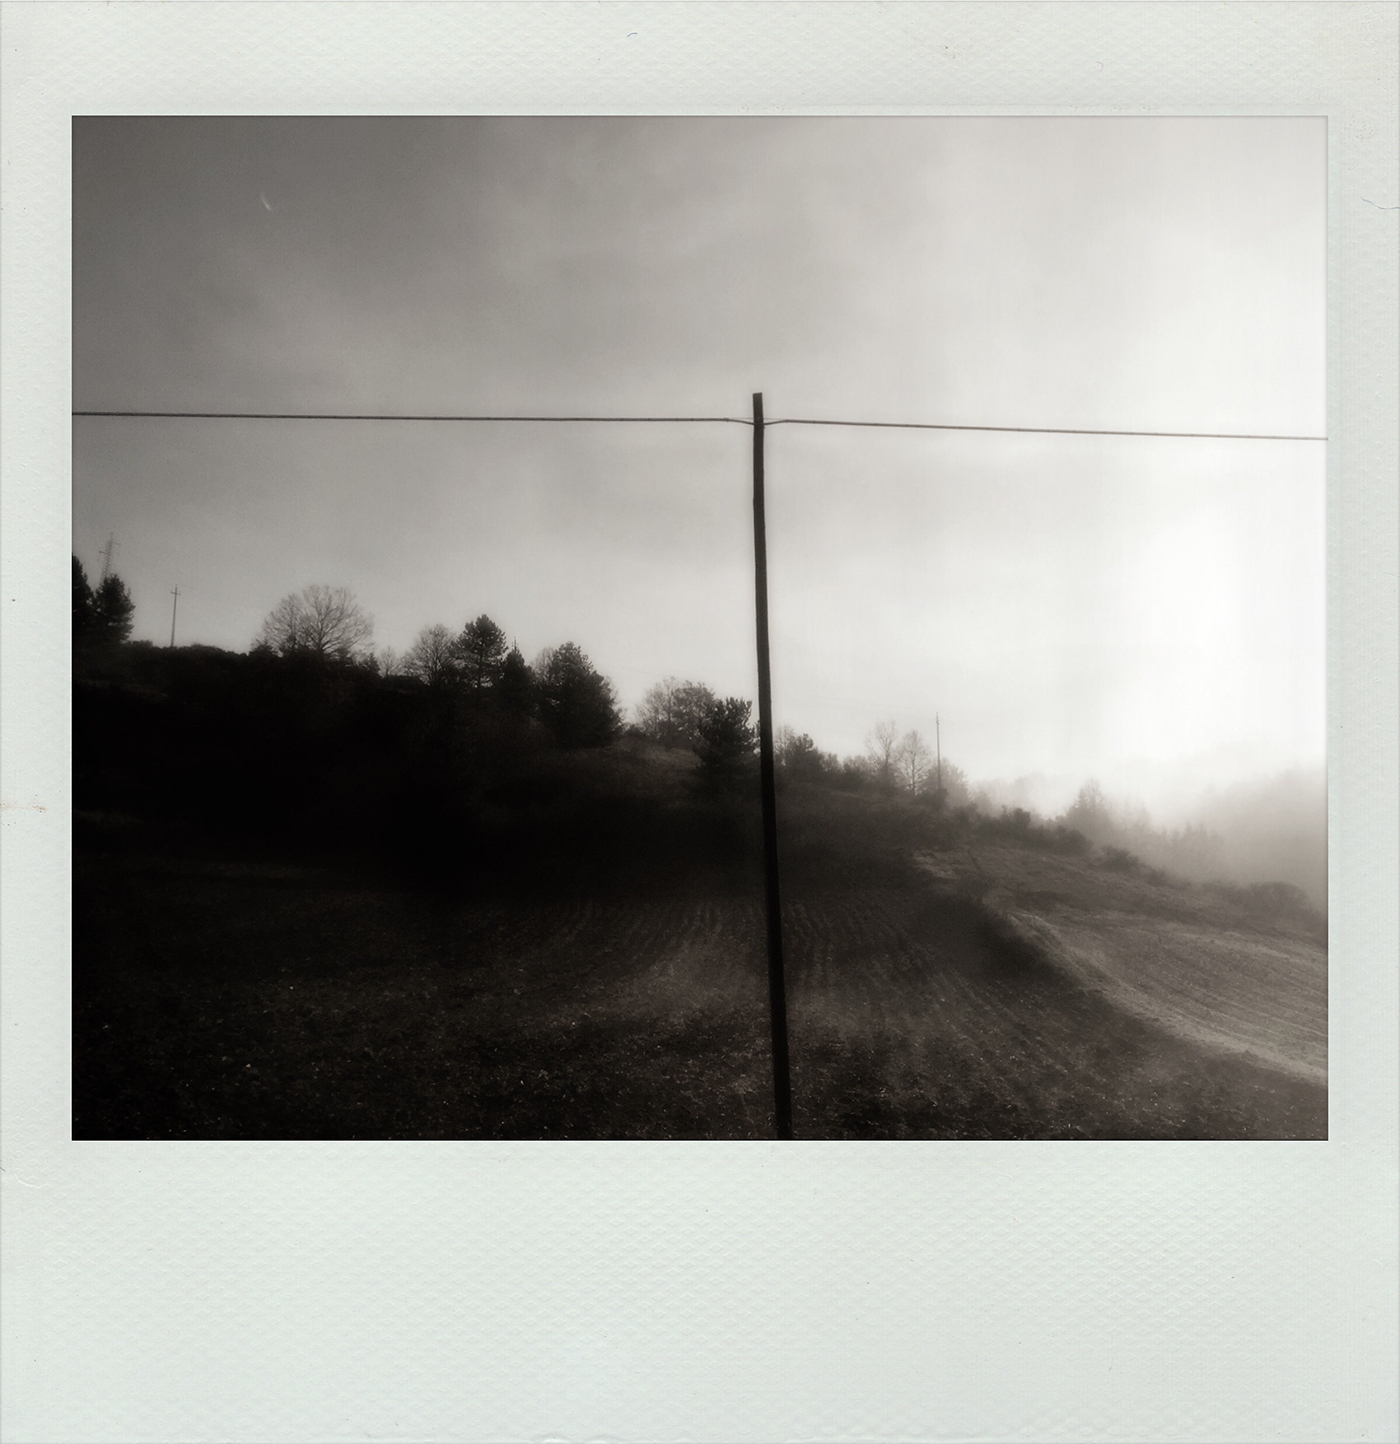 Landscape black and white POLAROID fog Claudia Ioan Photographic Project outdoors